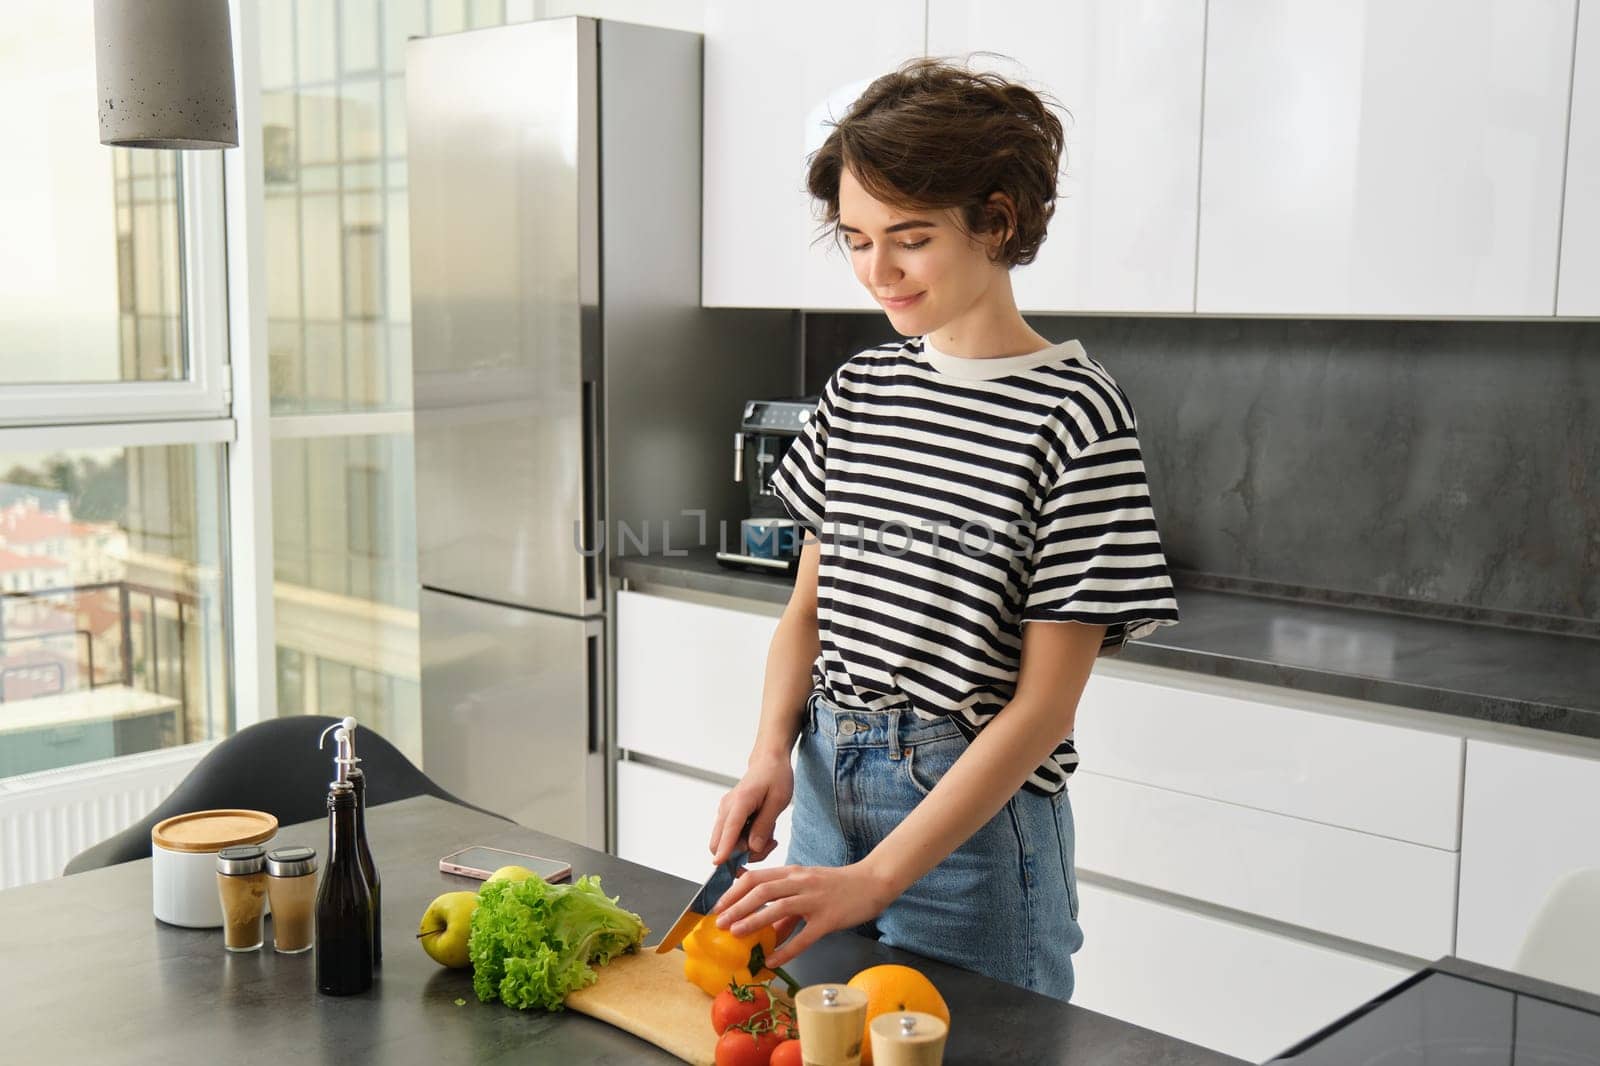 Portrait of smiling cute young woman making breakfast, chopping vegetables in the kitchen, preparing vegan meal.